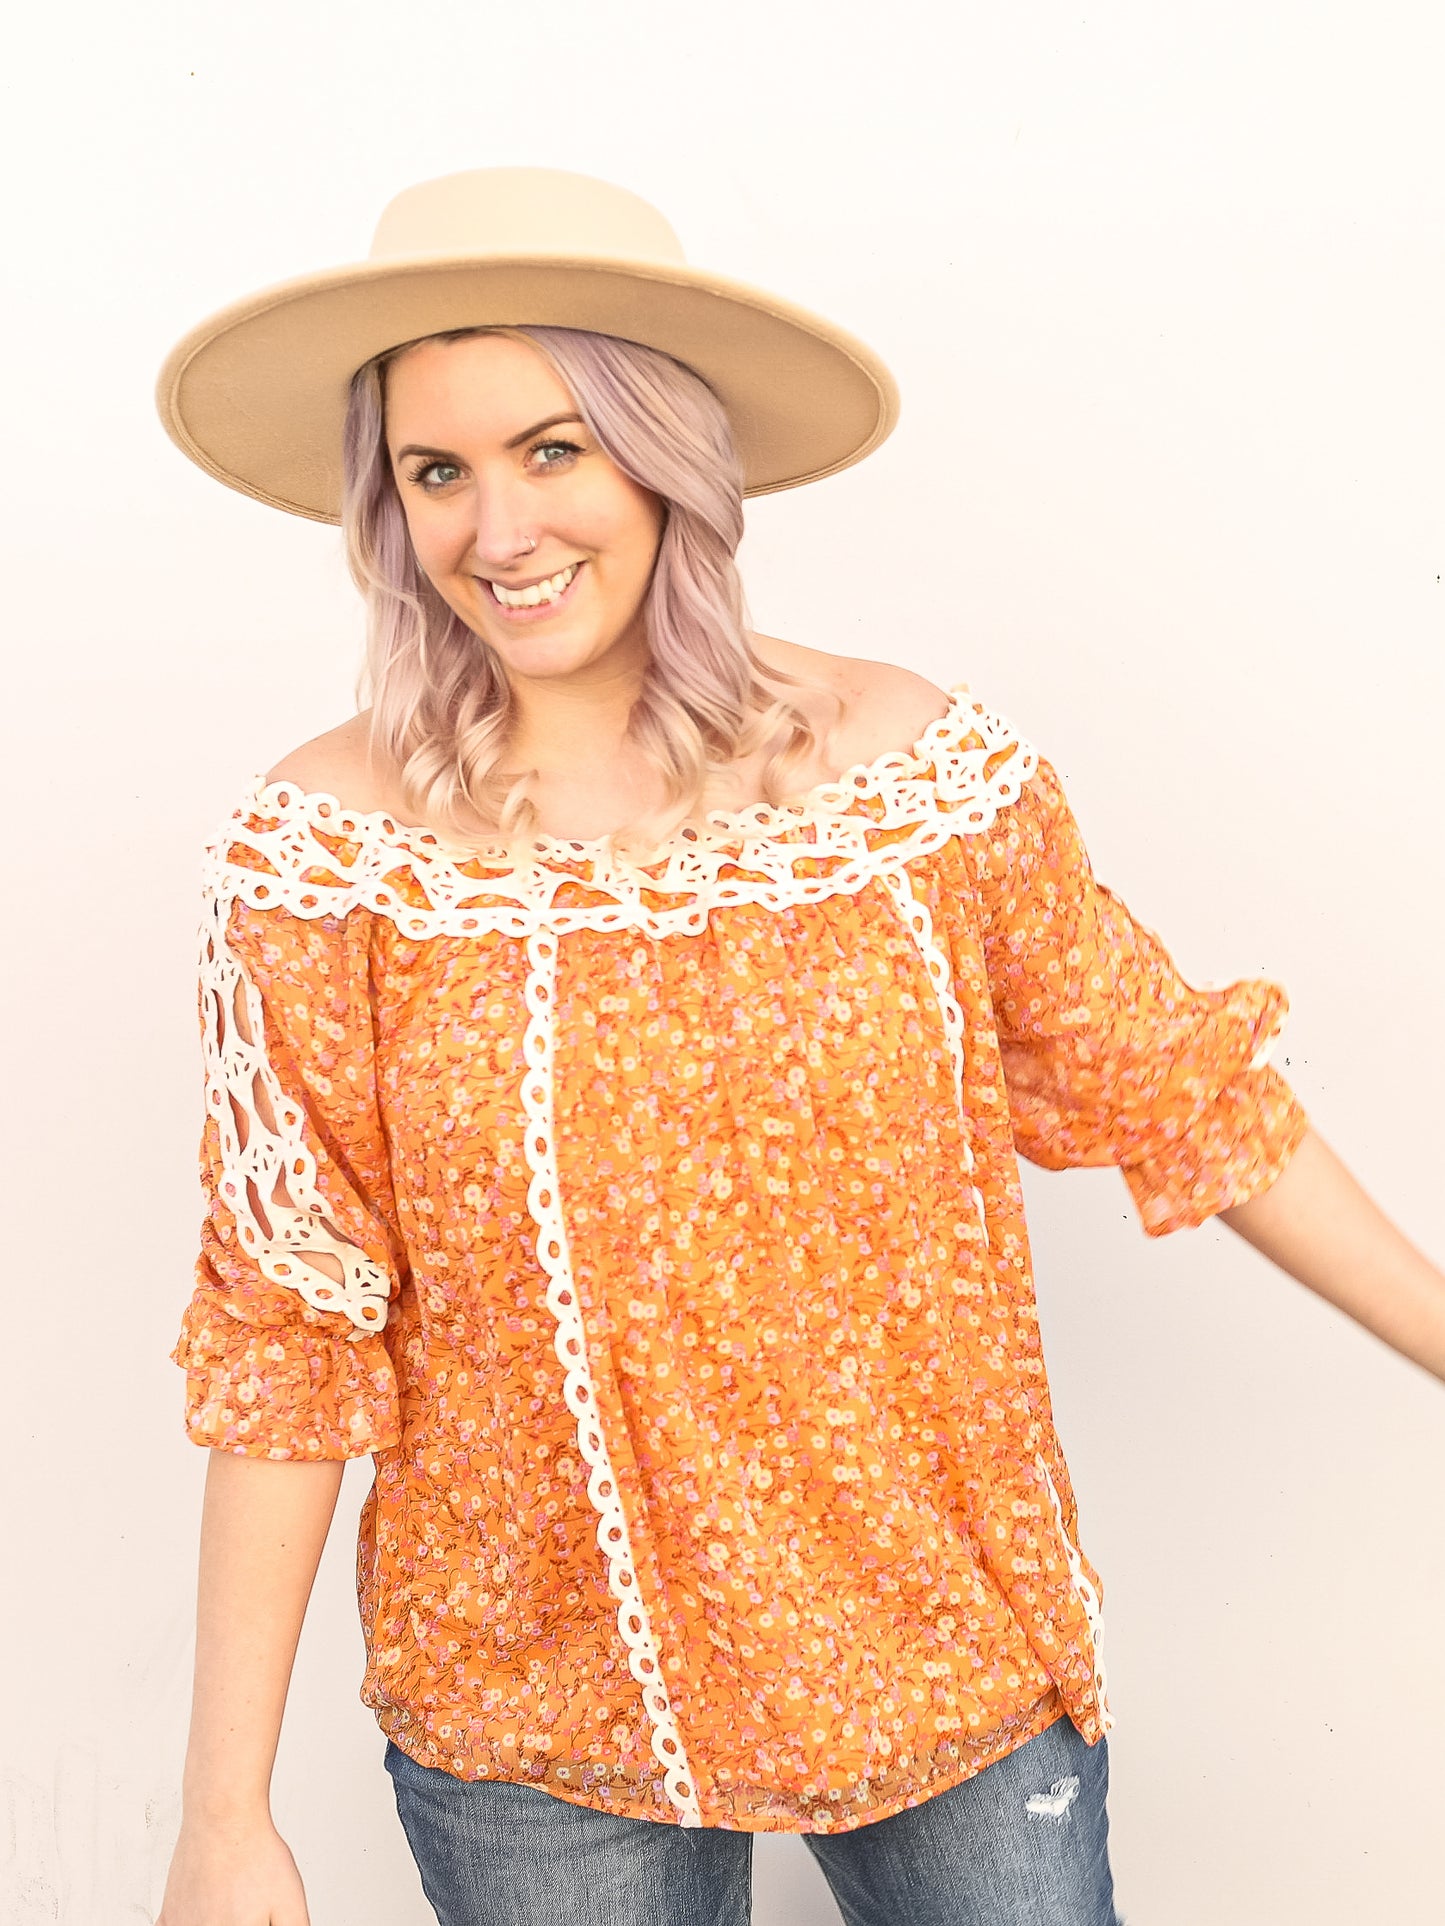 Orange floral top paired with a hat and jeans